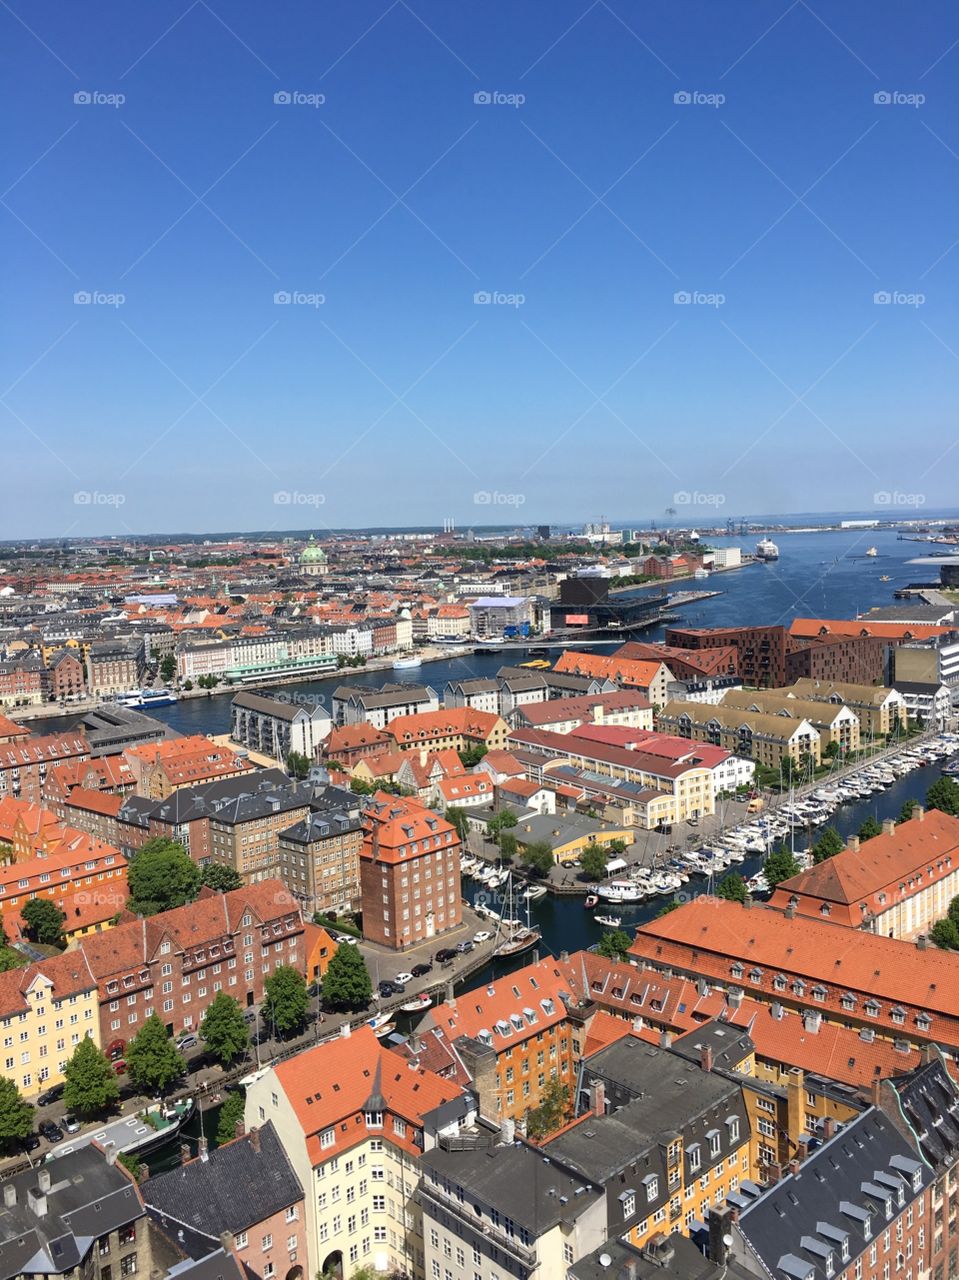 View of Copenhagen, Denmark from the top of the corkscrew spire of the Church of Our Savior. 